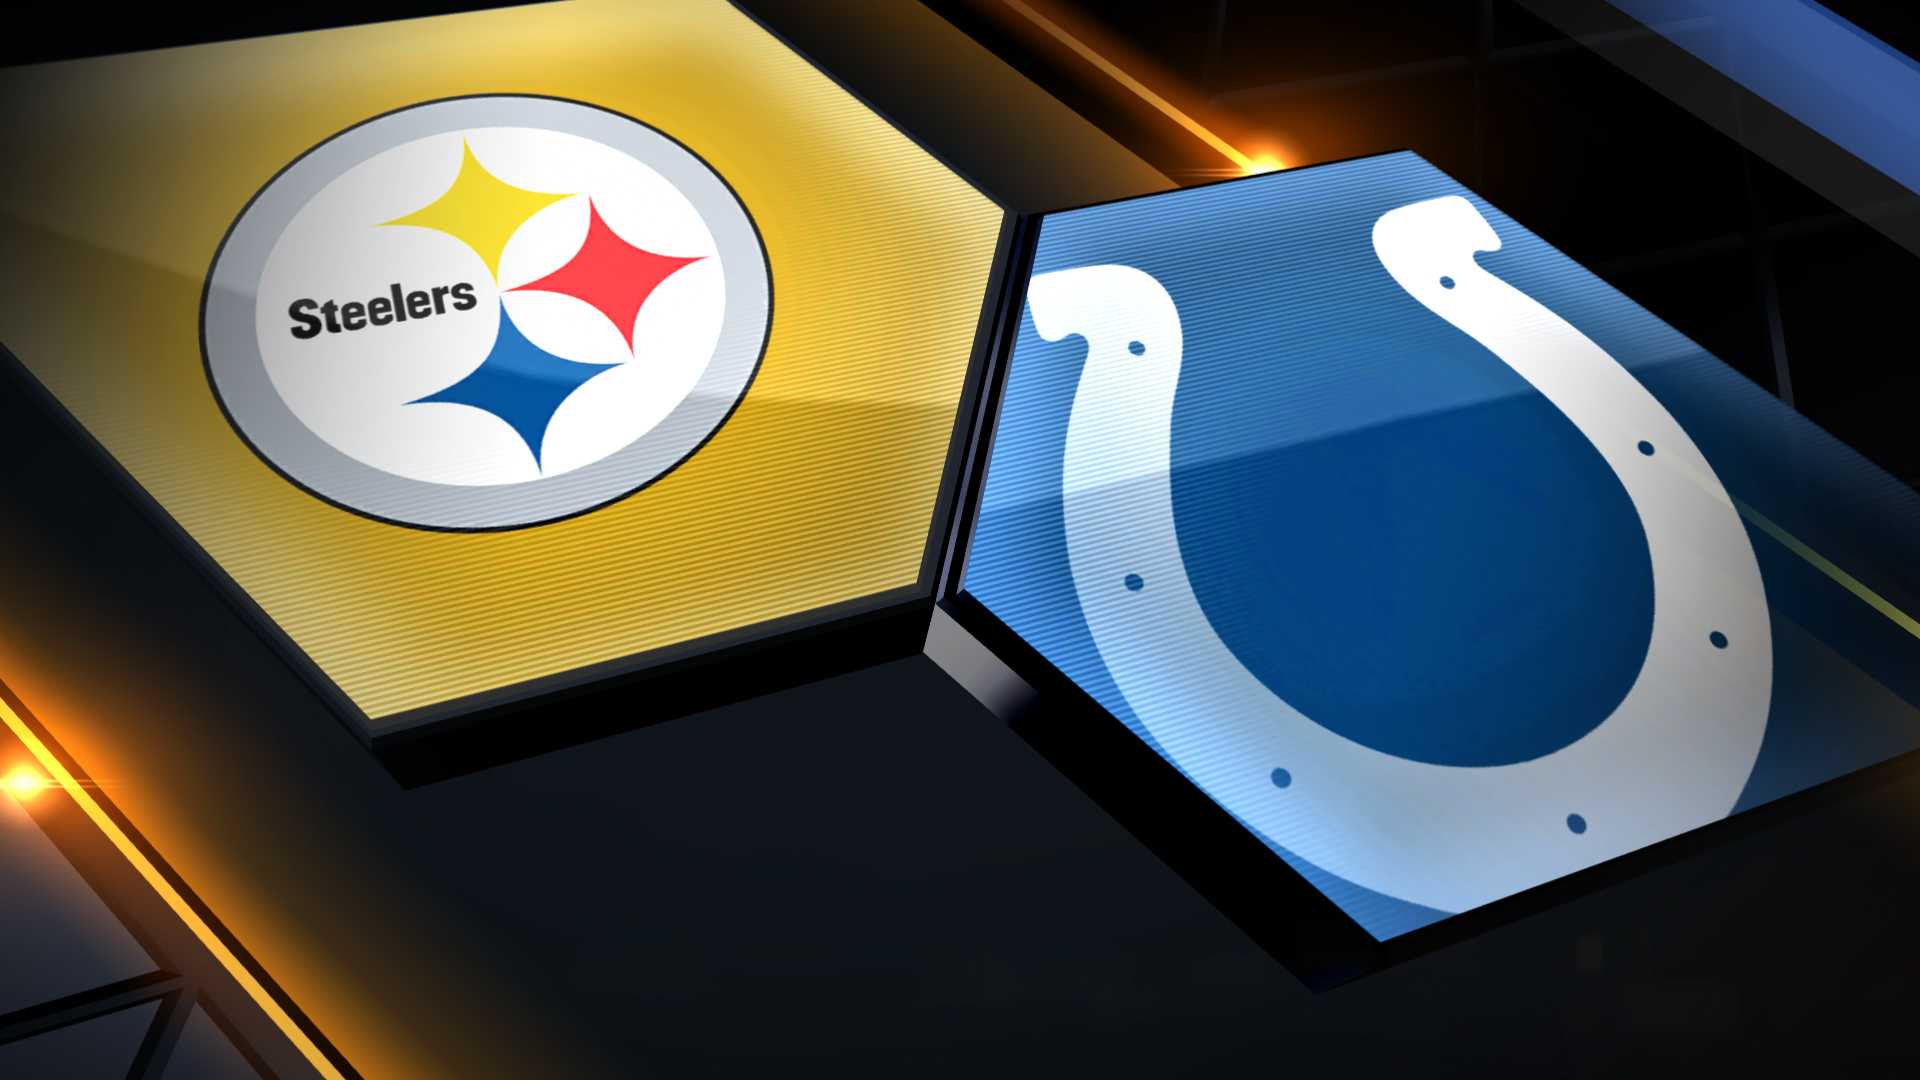 Pittsburgh Steelers vs. Indianapolis Colts Week 12 preview